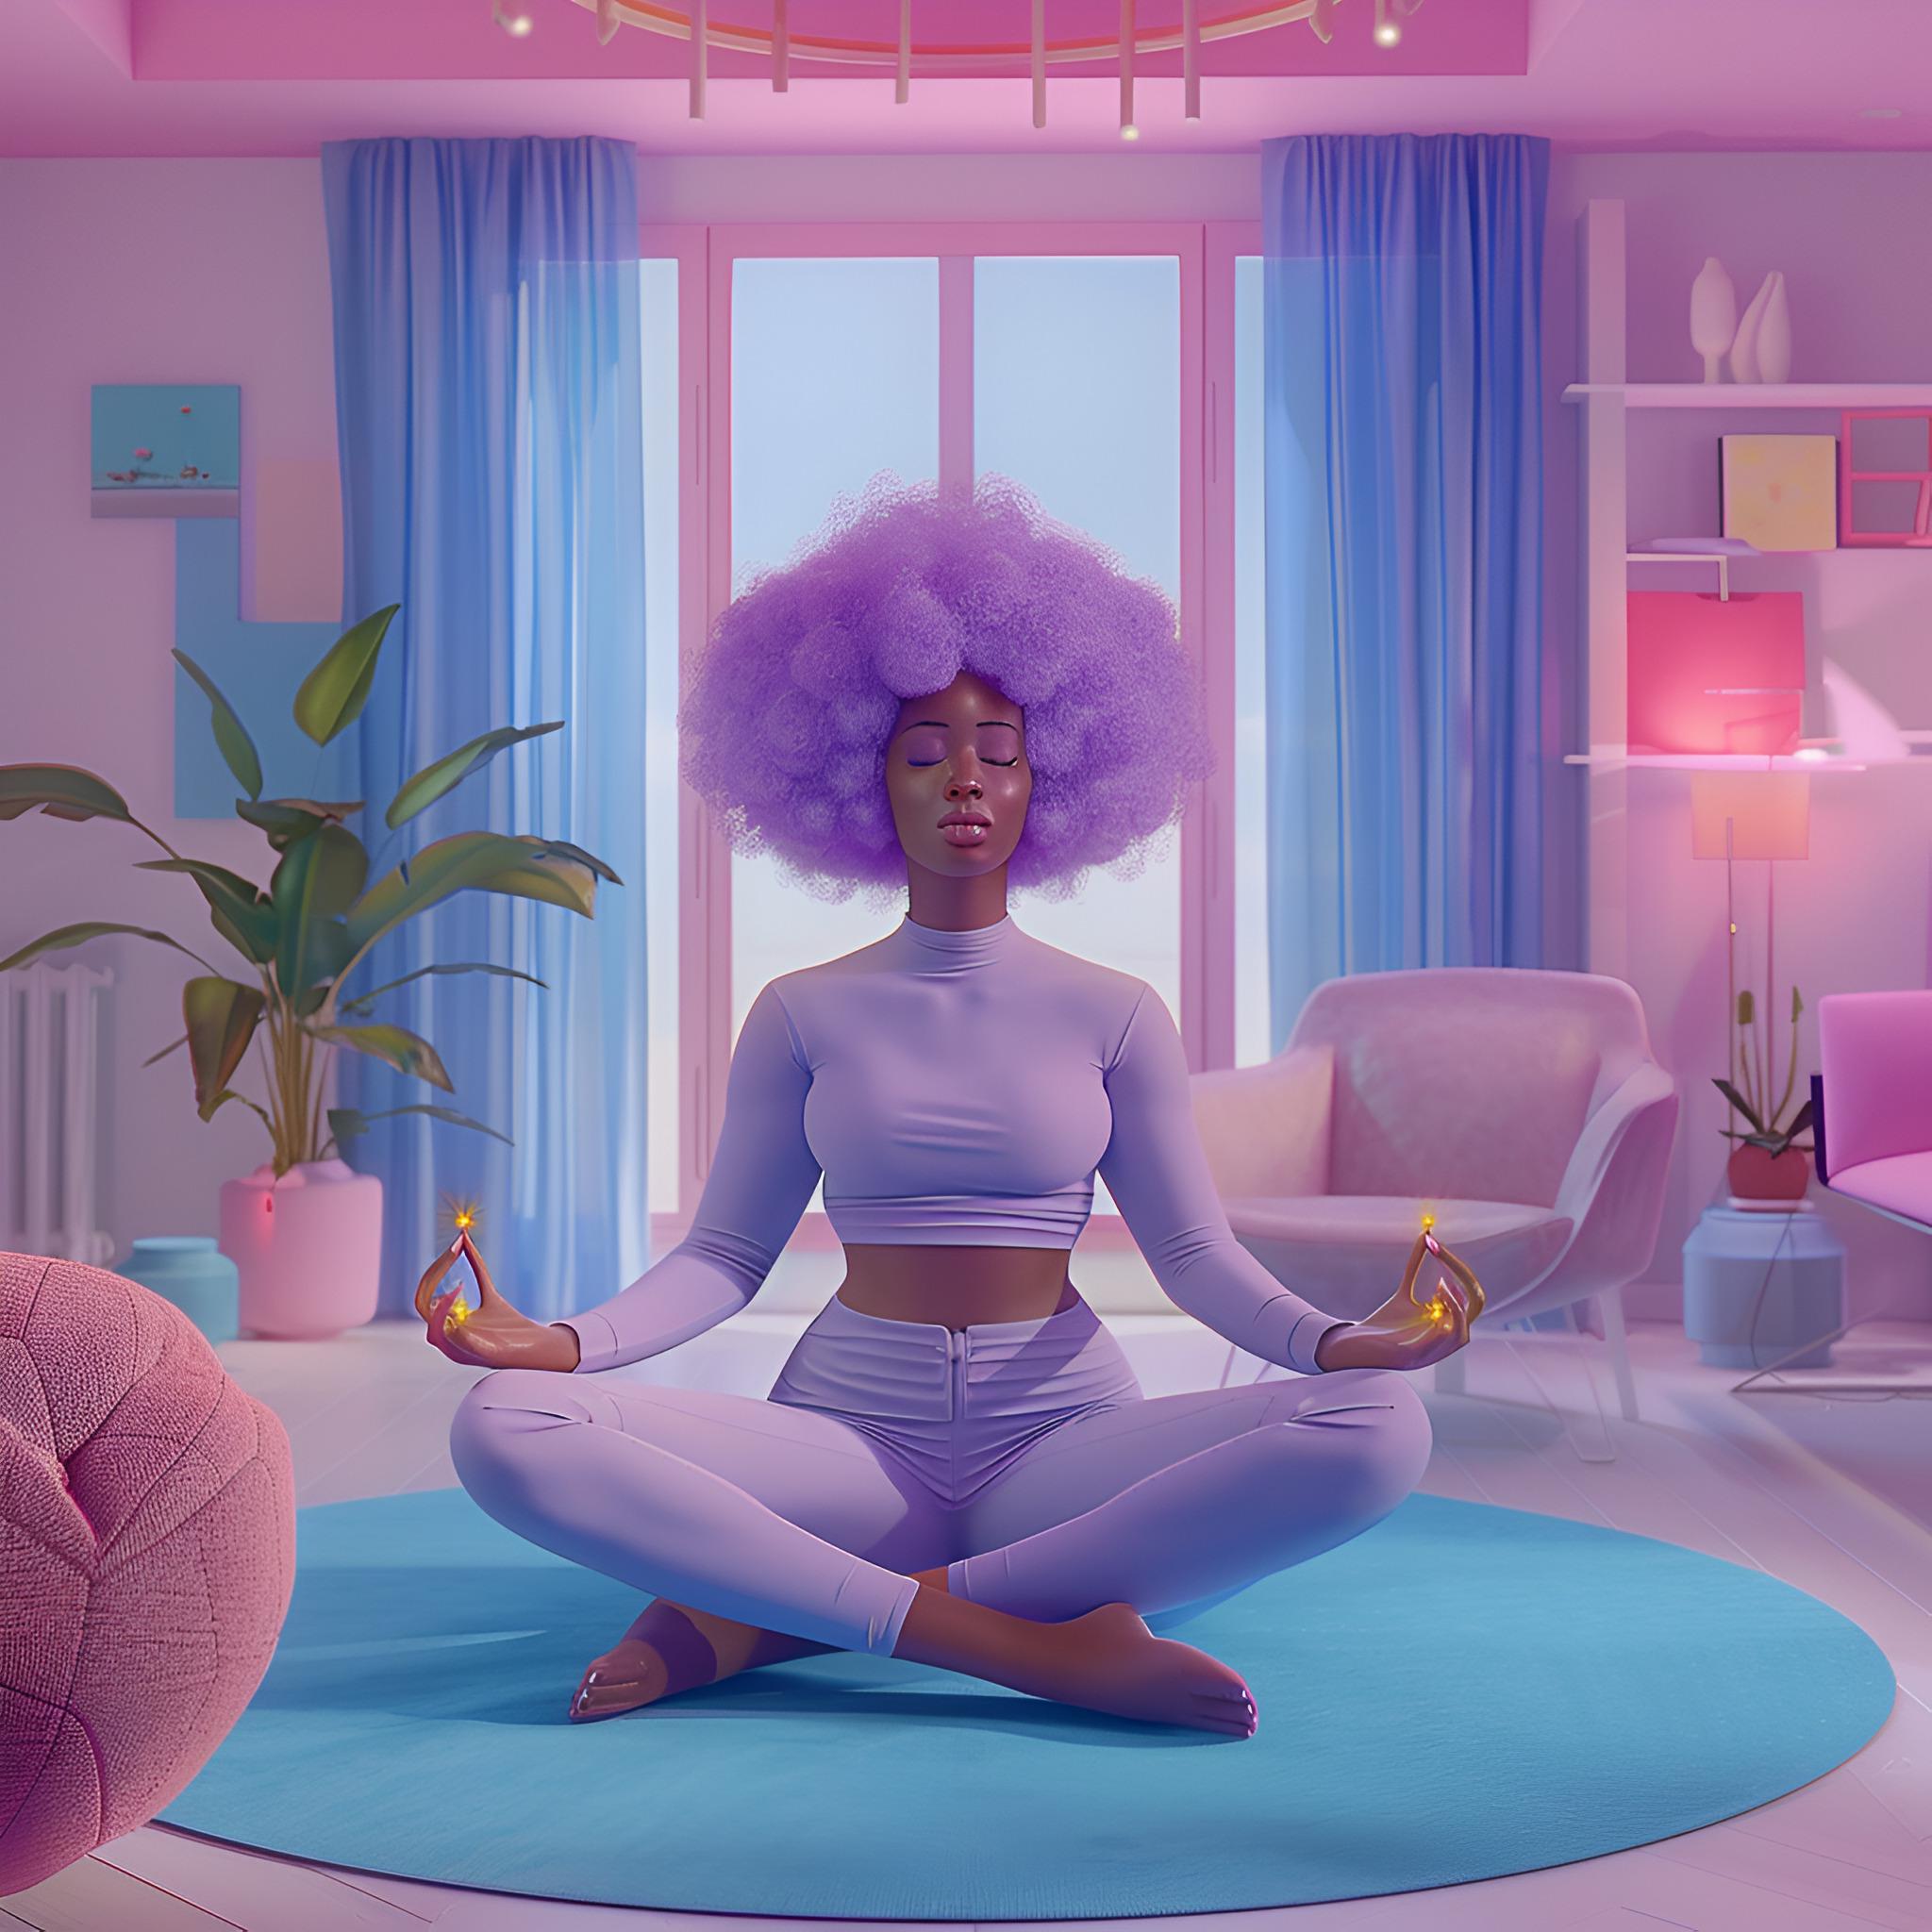 Guided Meditation For Black Women - Guided Meditation For Black Women: Embracing Calm